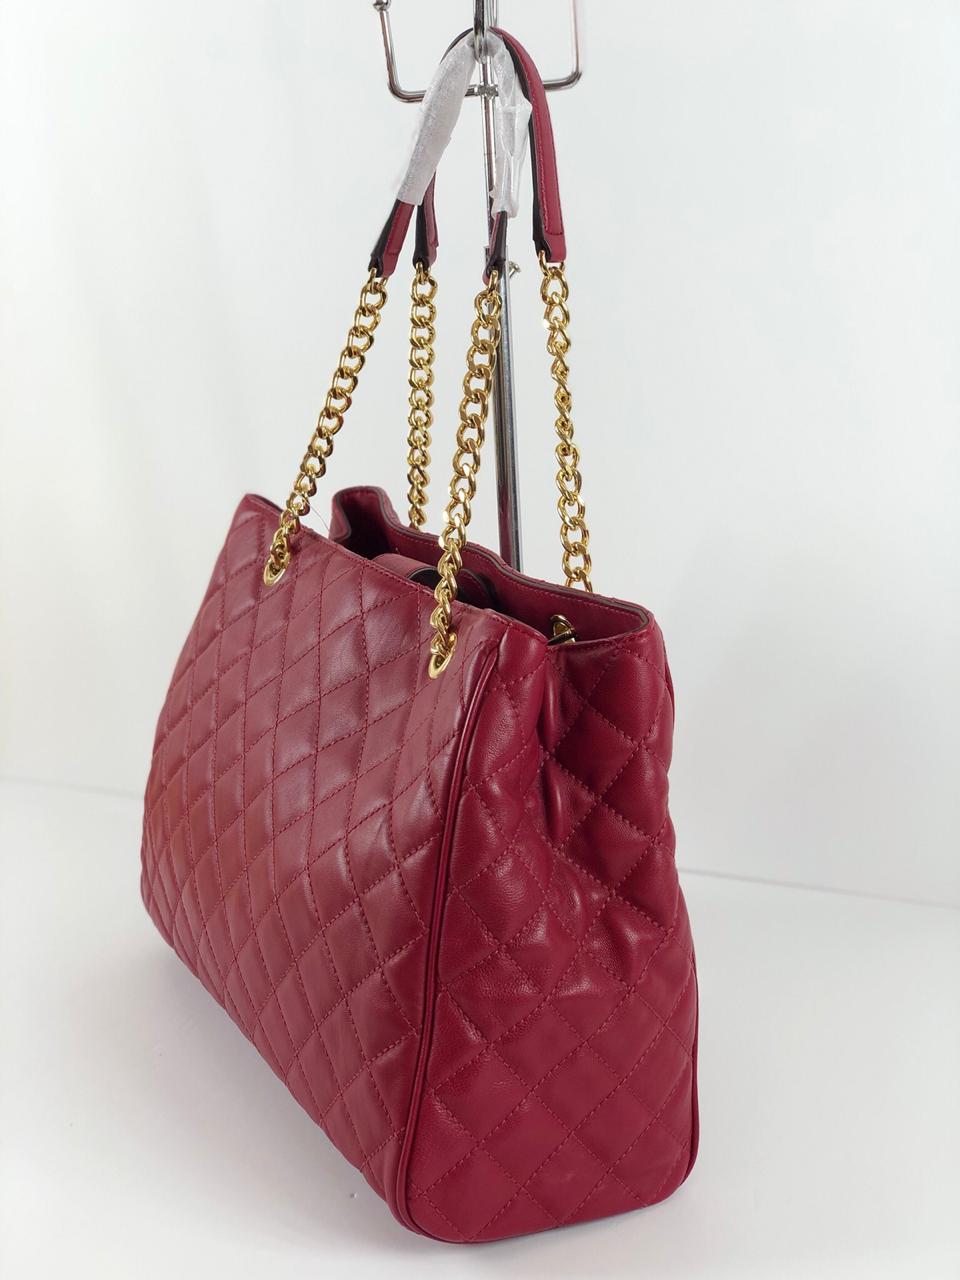 michael kors red quilted bag